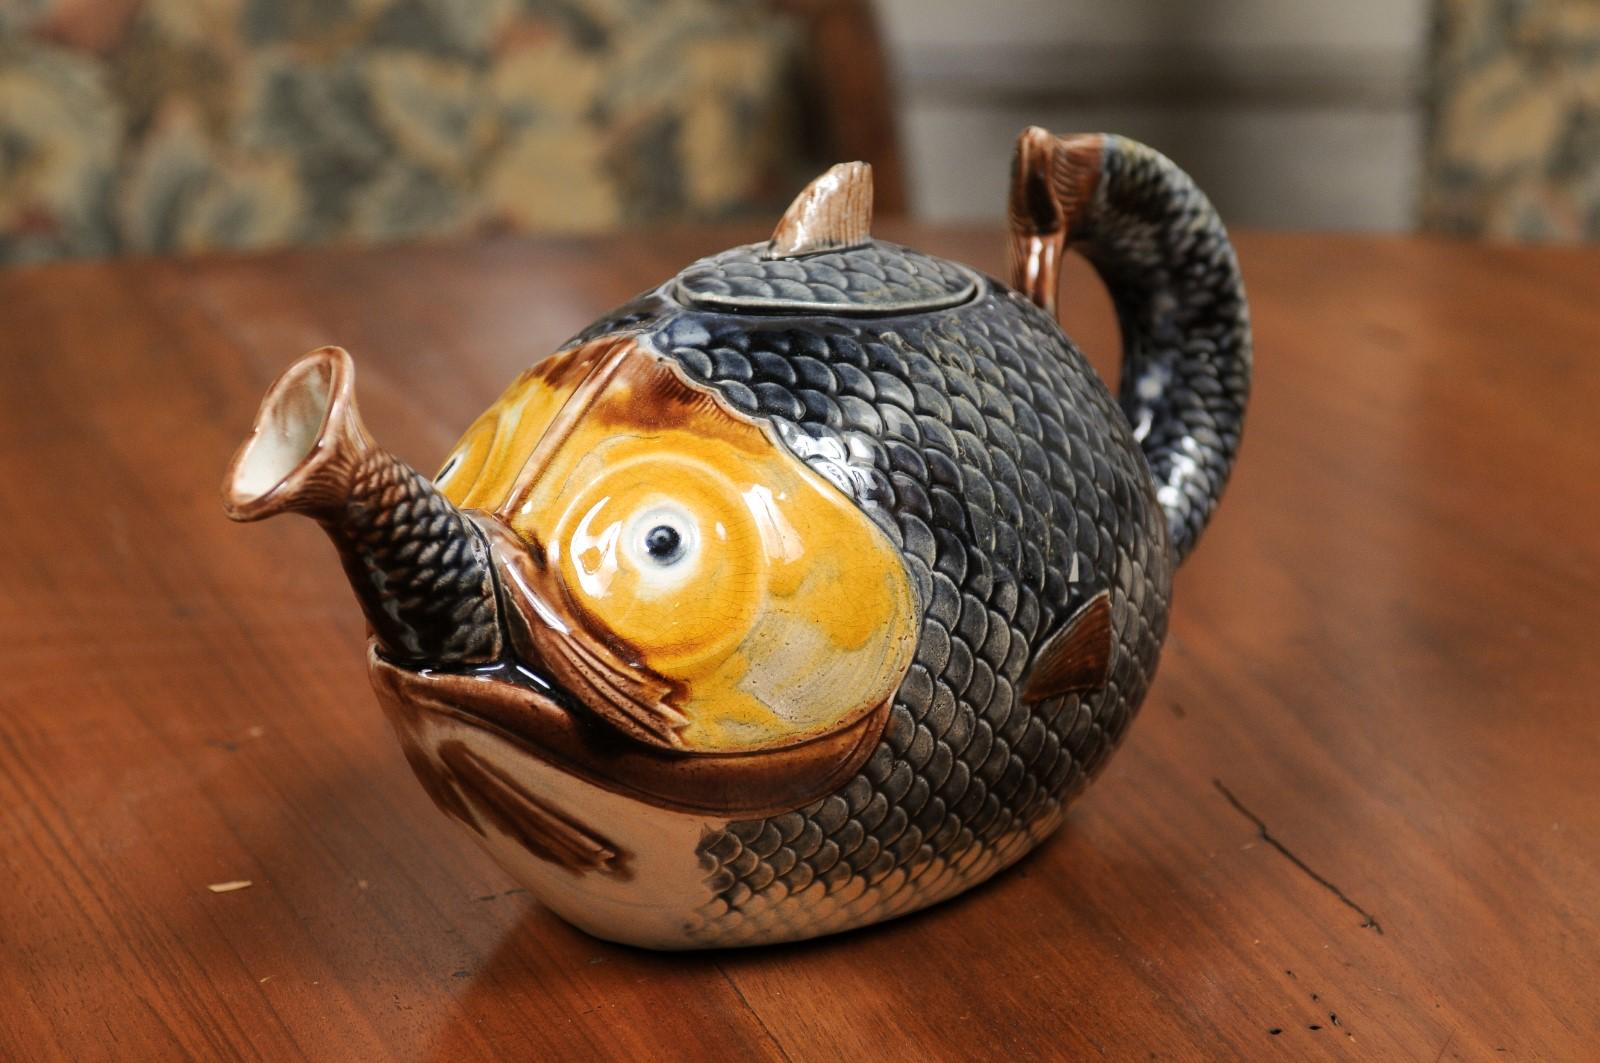 French 1885s Glazed Majolica Teapot Depicting a Fish Eating Another Fish 7